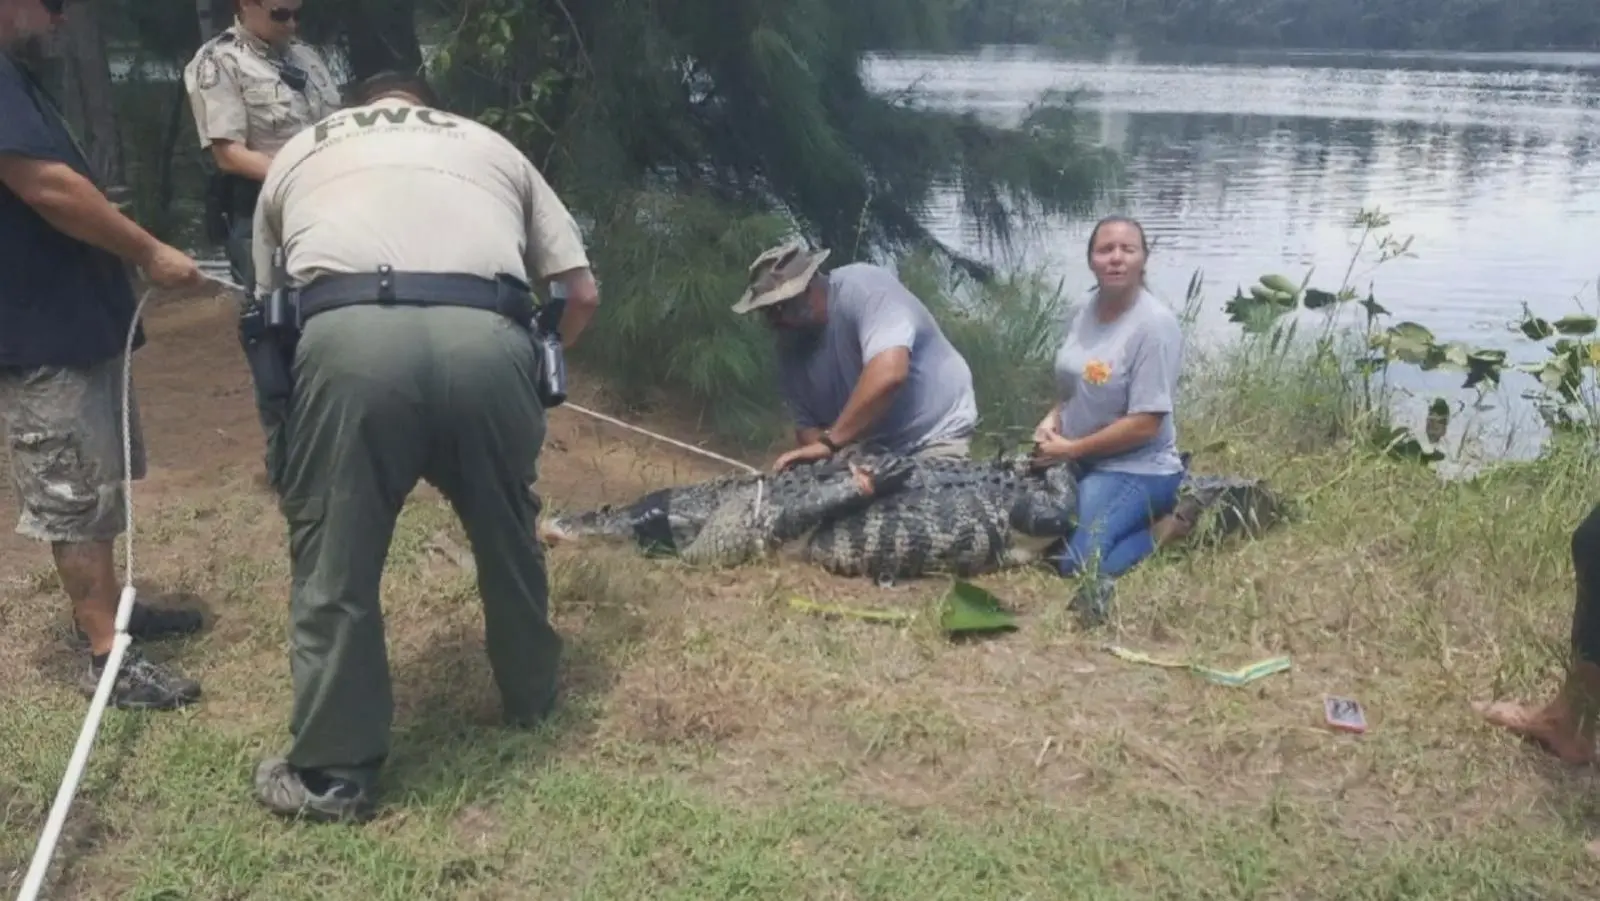 How Woman’s Body Was Found In Jaws Of Alligator In US